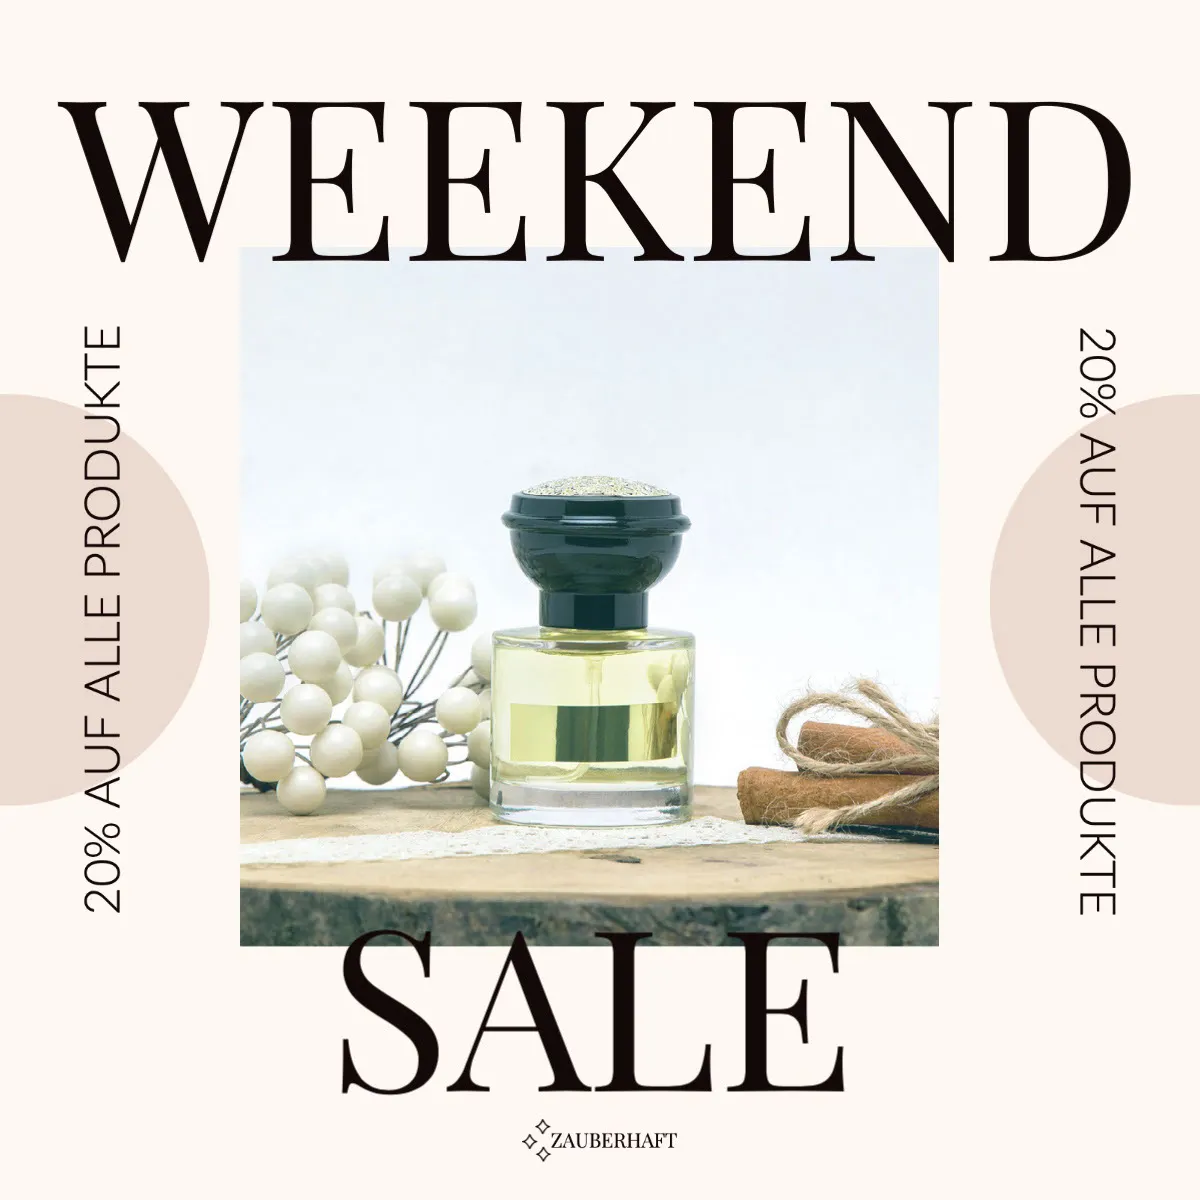 Neutral Tones Weekend Sale for Cosmetics and Beauty Products Instagram Square Post